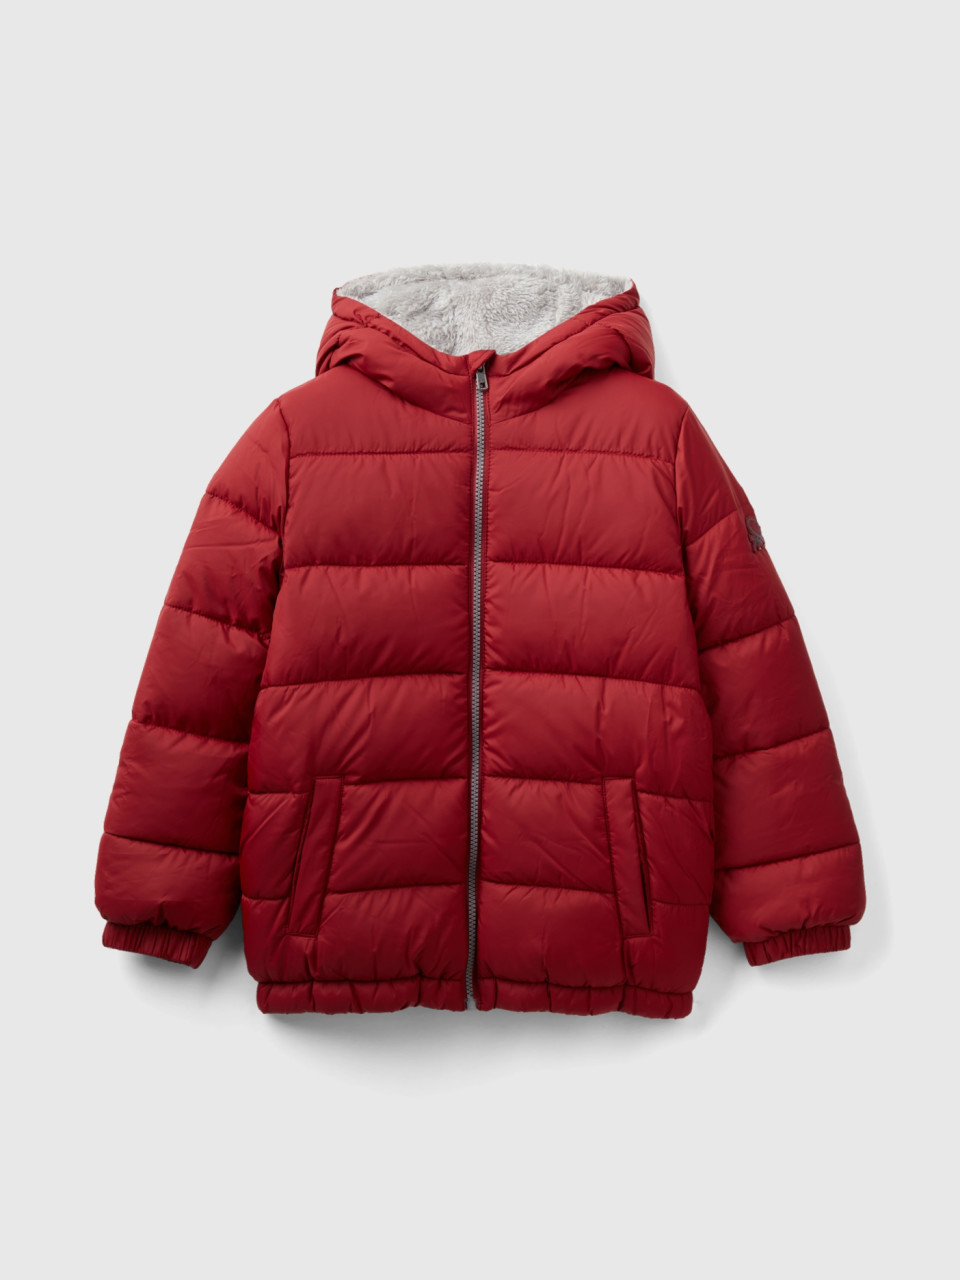 Benetton, Padded Jacket With Teddy Interior, Red, Kids